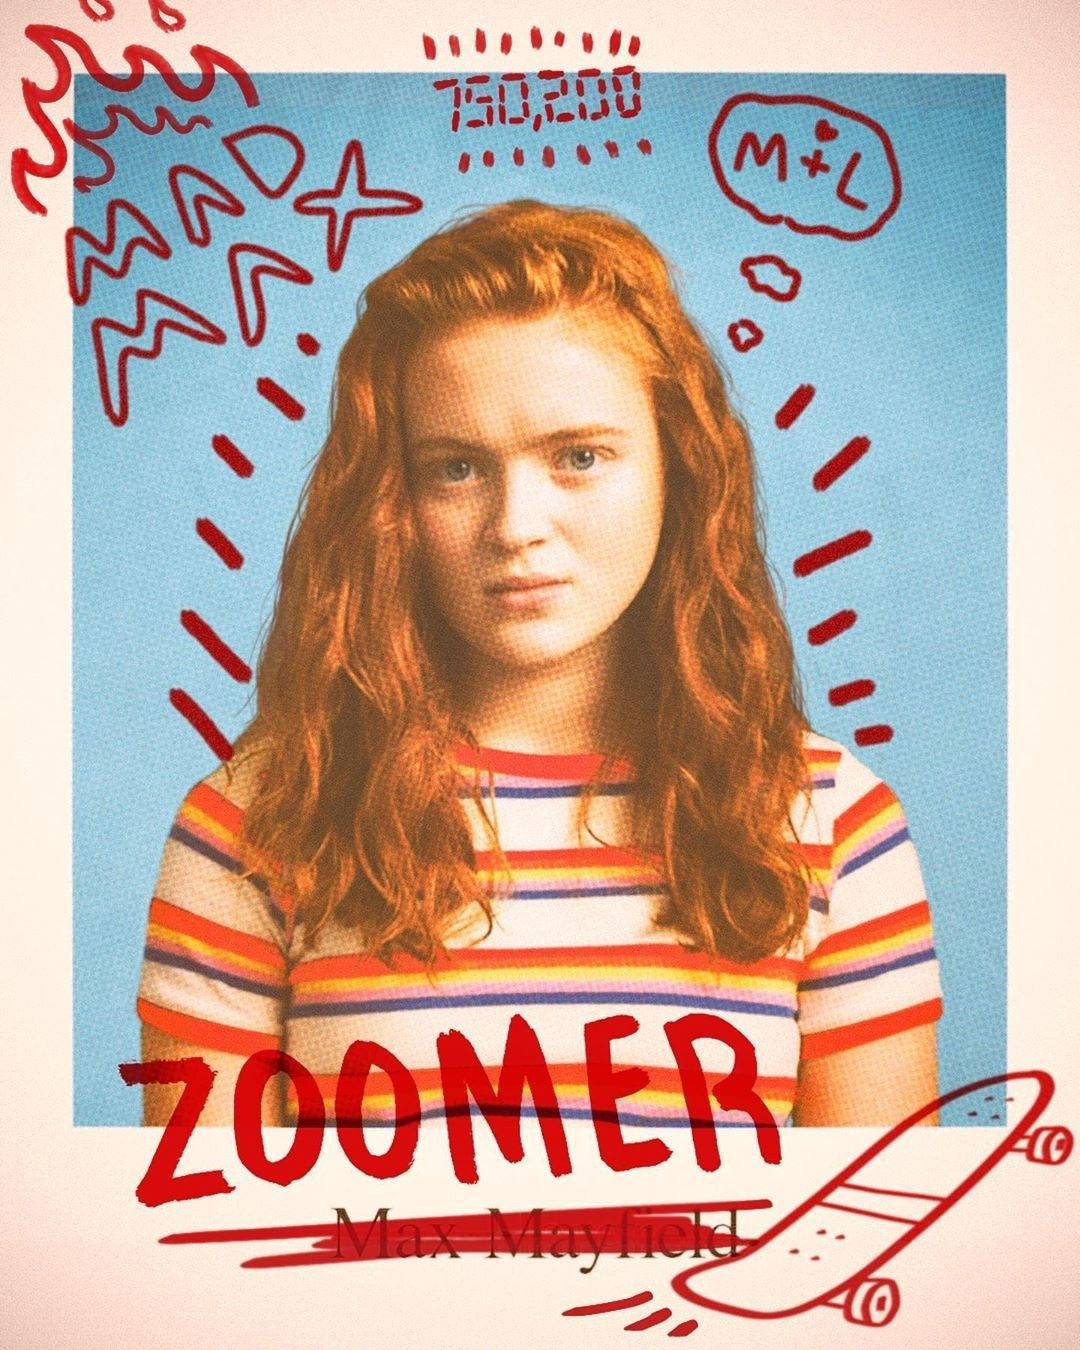 Max Mayfield is The Zoomer. Stranger Things 3. Stranger things sticker, Stranger things max, Stranger things characters